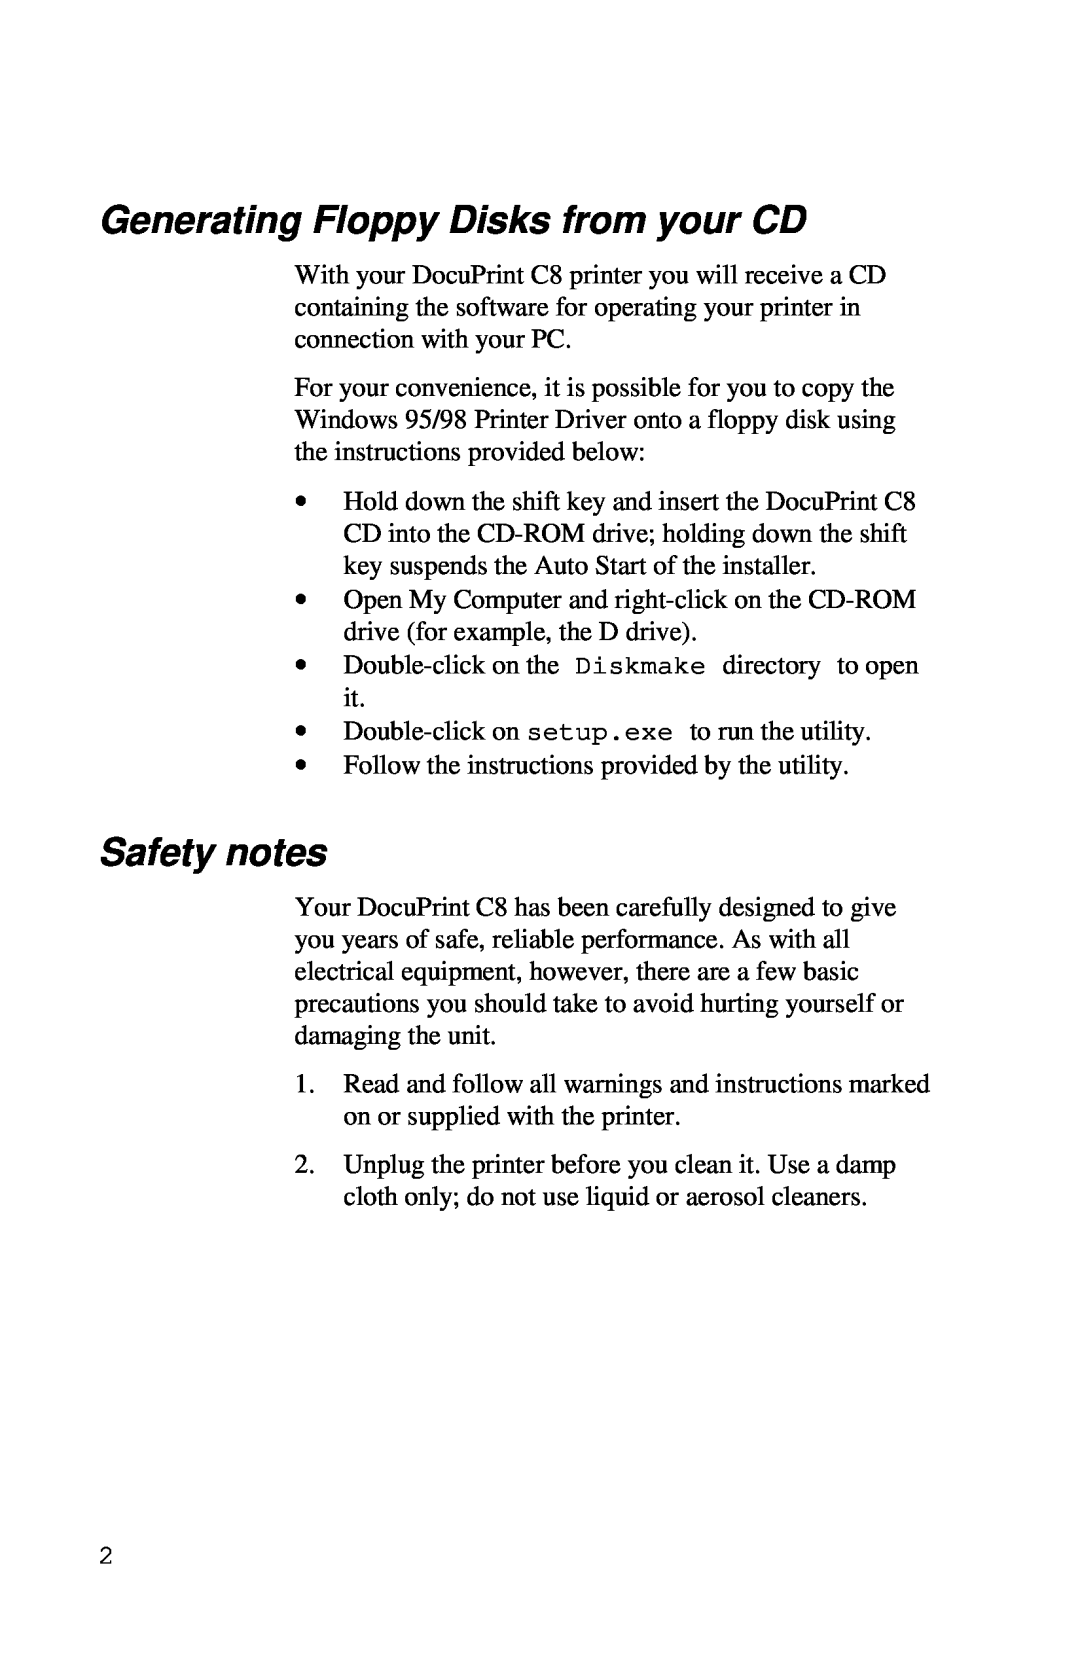 Xerox Inkjet Printer manual Generating Floppy Disks from your CD, Safety notes 